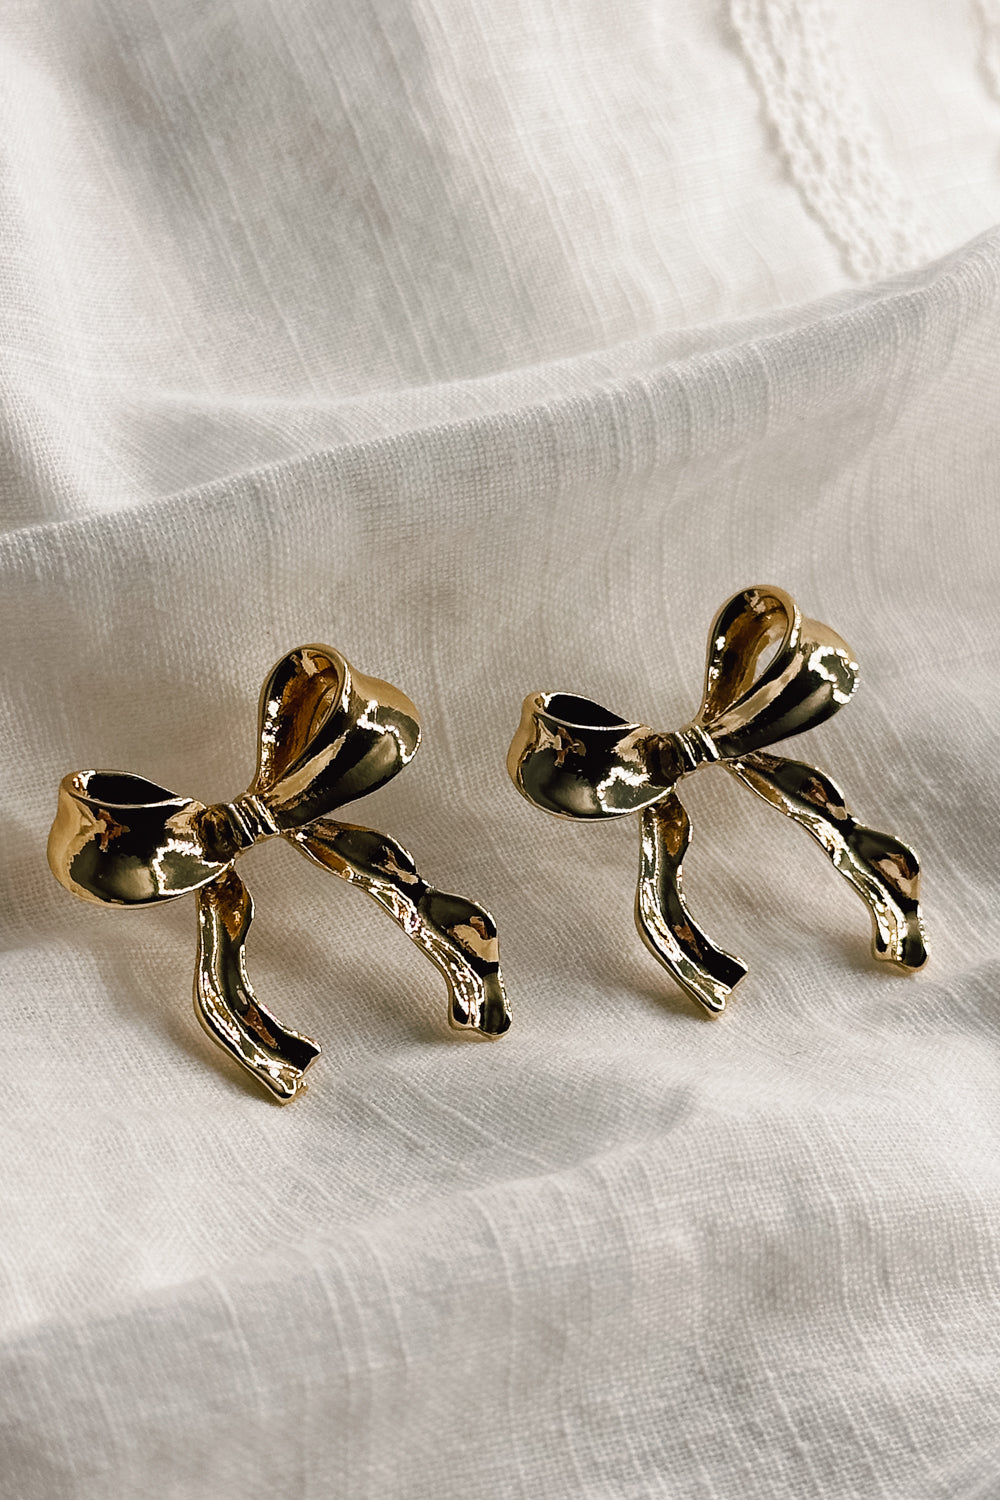 Flat lay view of the Lois Gold Bow Stud Earrings which features gold bow shaped earrings with stud back closures